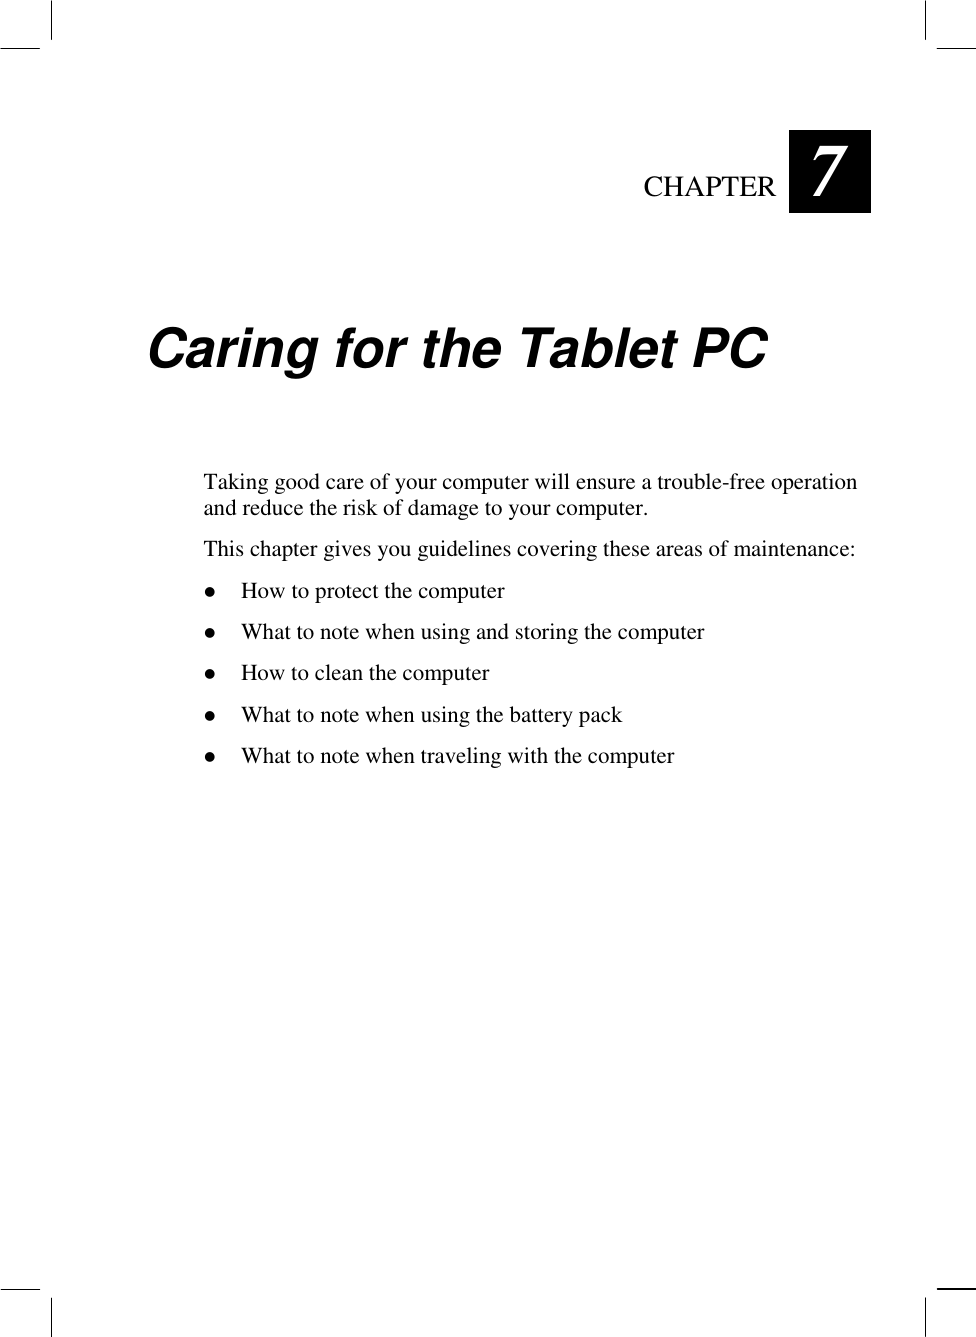   CHAPTER  7 Caring for the Tablet PC Taking good care of your computer will ensure a trouble-free operation and reduce the risk of damage to your computer. This chapter gives you guidelines covering these areas of maintenance: !  How to protect the computer !  What to note when using and storing the computer !  How to clean the computer !  What to note when using the battery pack !  What to note when traveling with the computer 